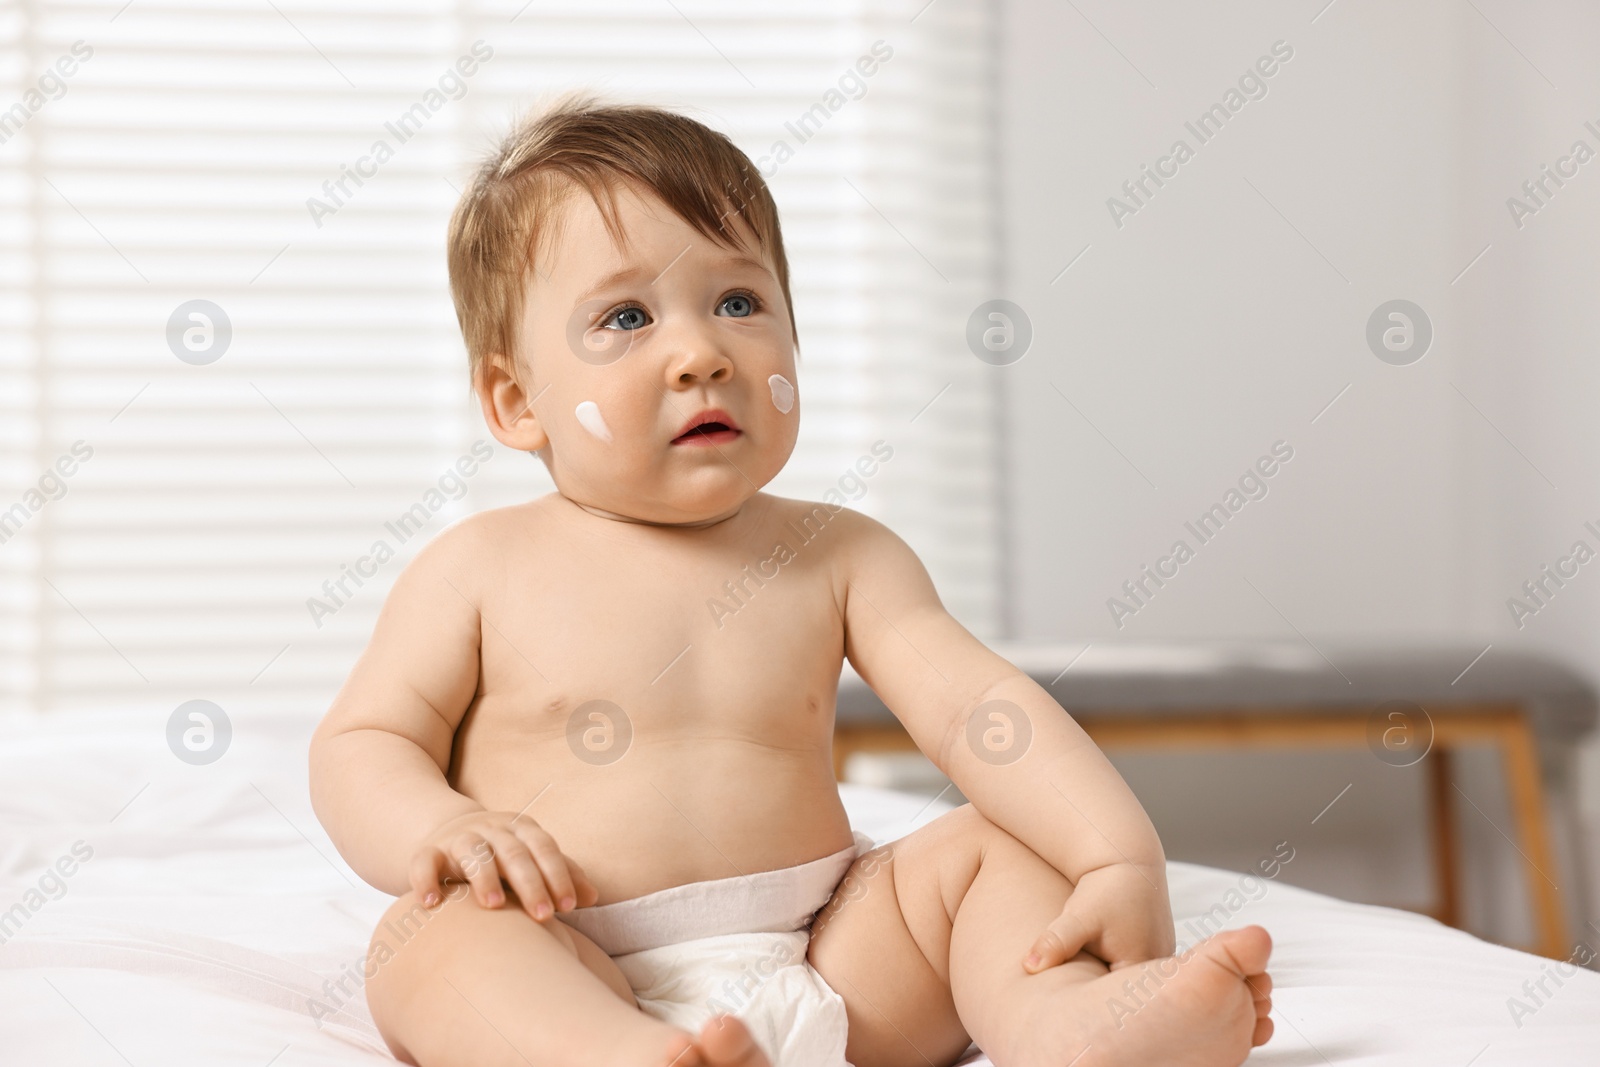 Photo of Cute little baby with moisturizing cream on face sitting on bed indoors